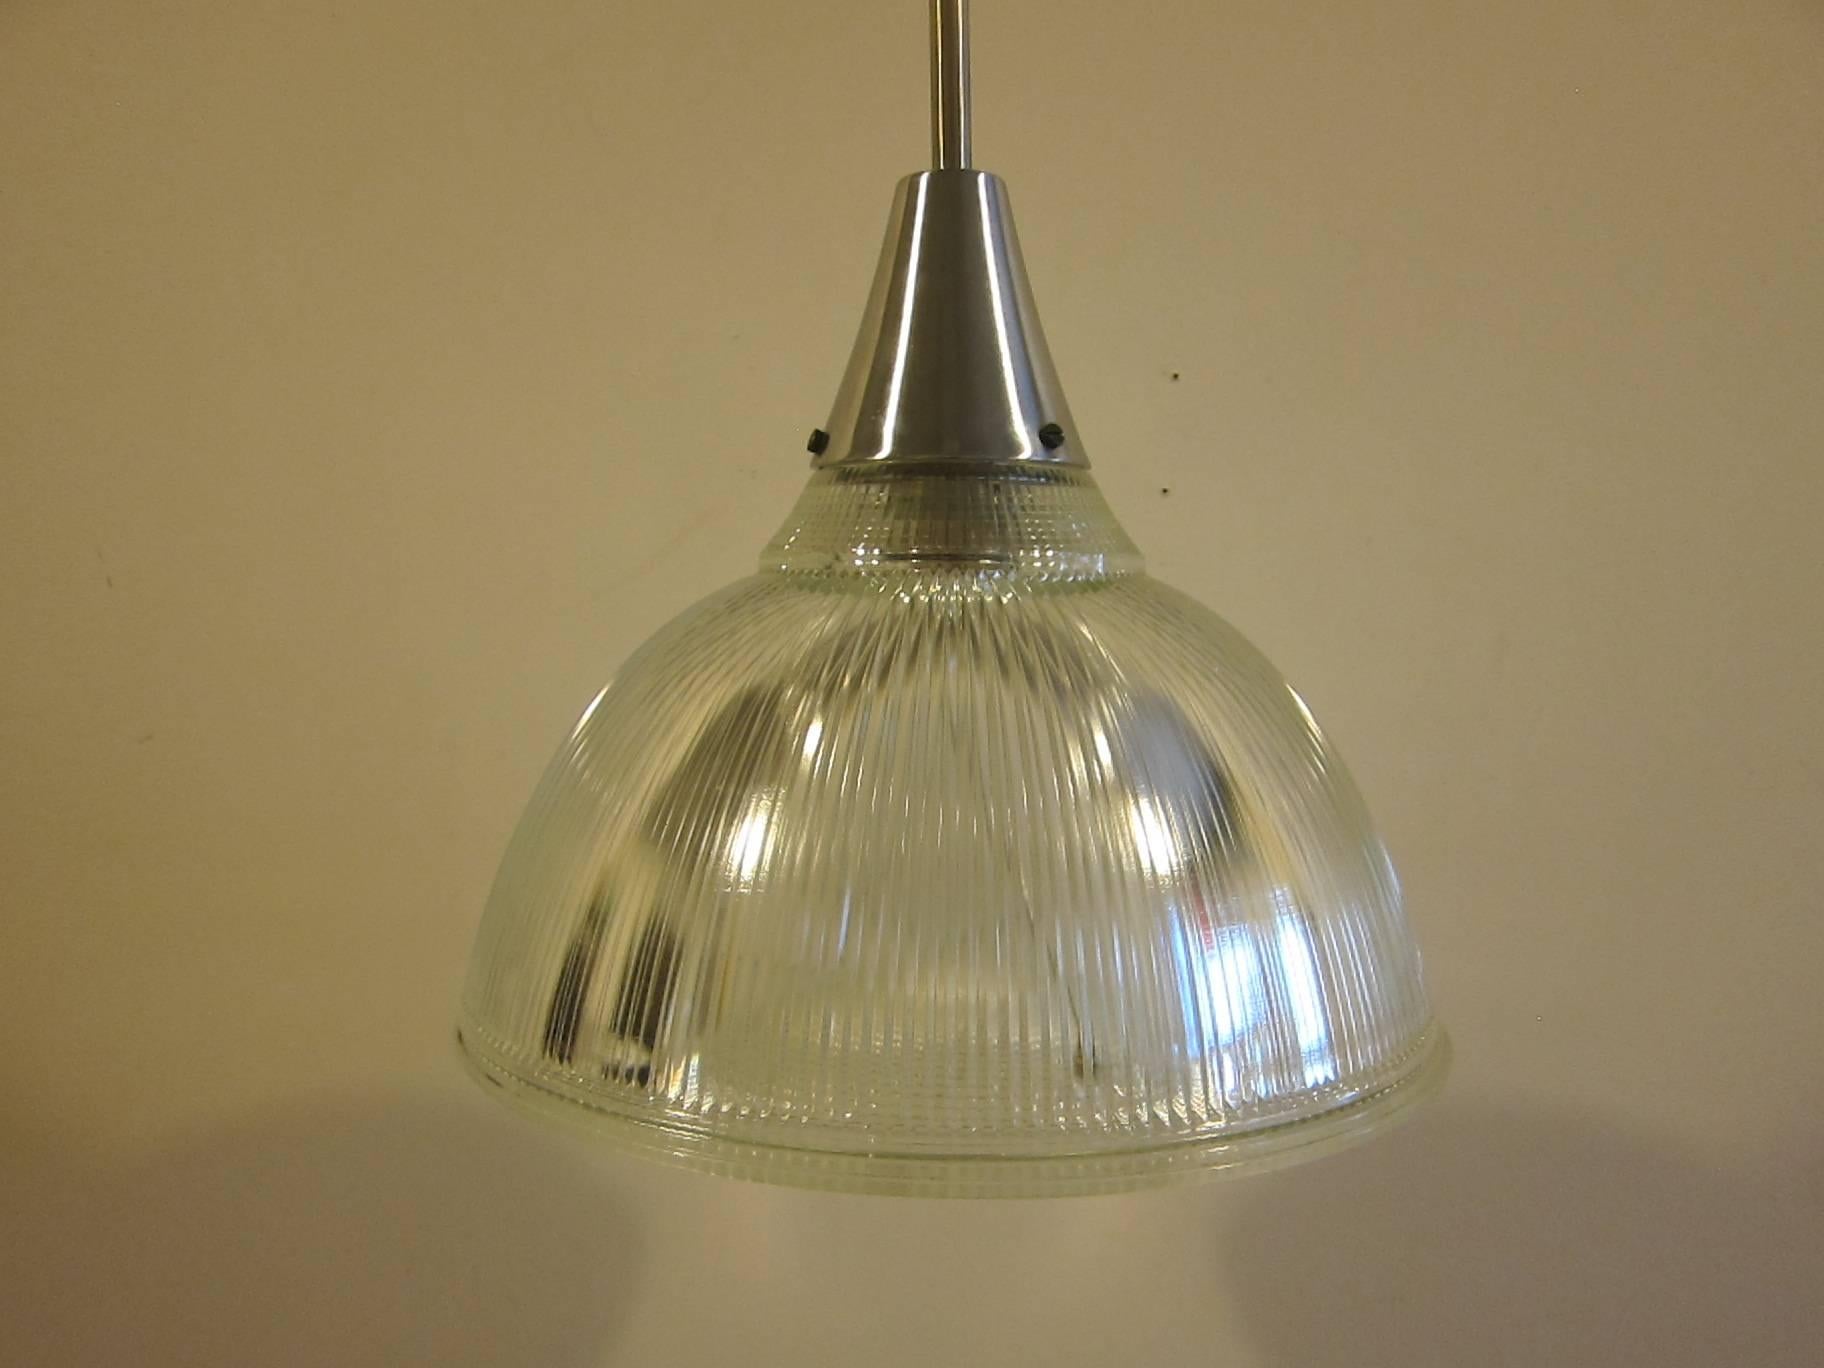 1950s Holophane pendant lamp in excellent condition. Pair available.
Perfect Holophane shade complete with inner shell diffuser. New wiring.
Fixture is original, complete with drop down pole and plate cover. 300 watt capacity. 
Holophane label to